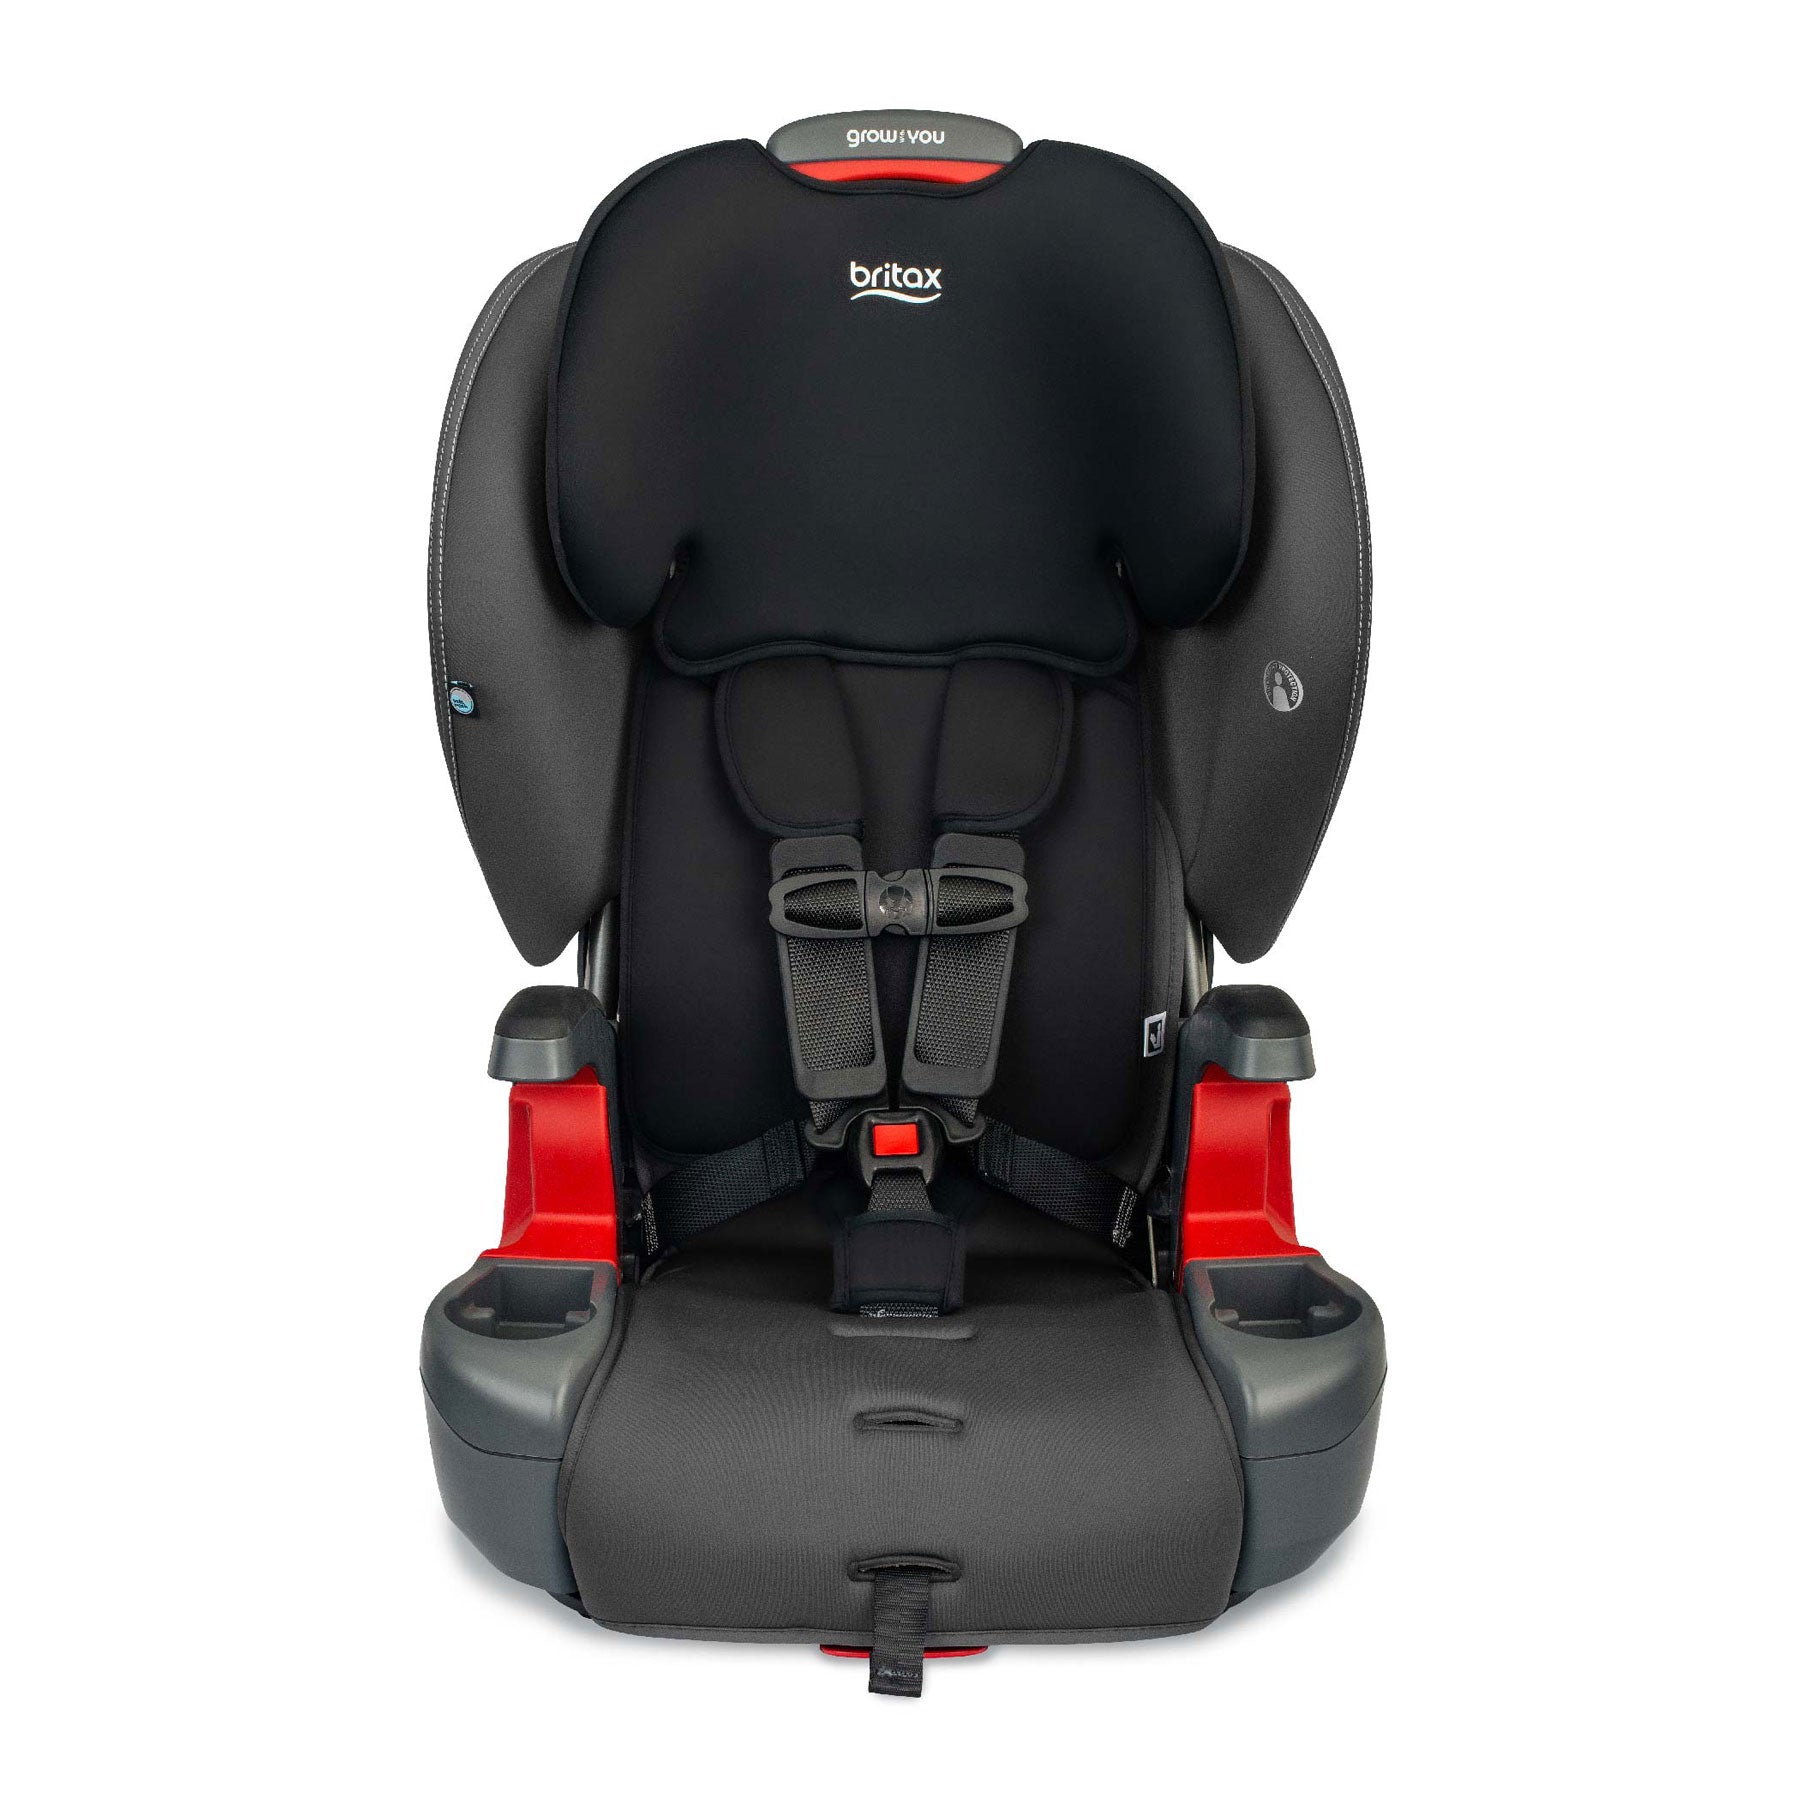 Britax Grow With You Harness-2-Booster Seat - Mod Black Safewash